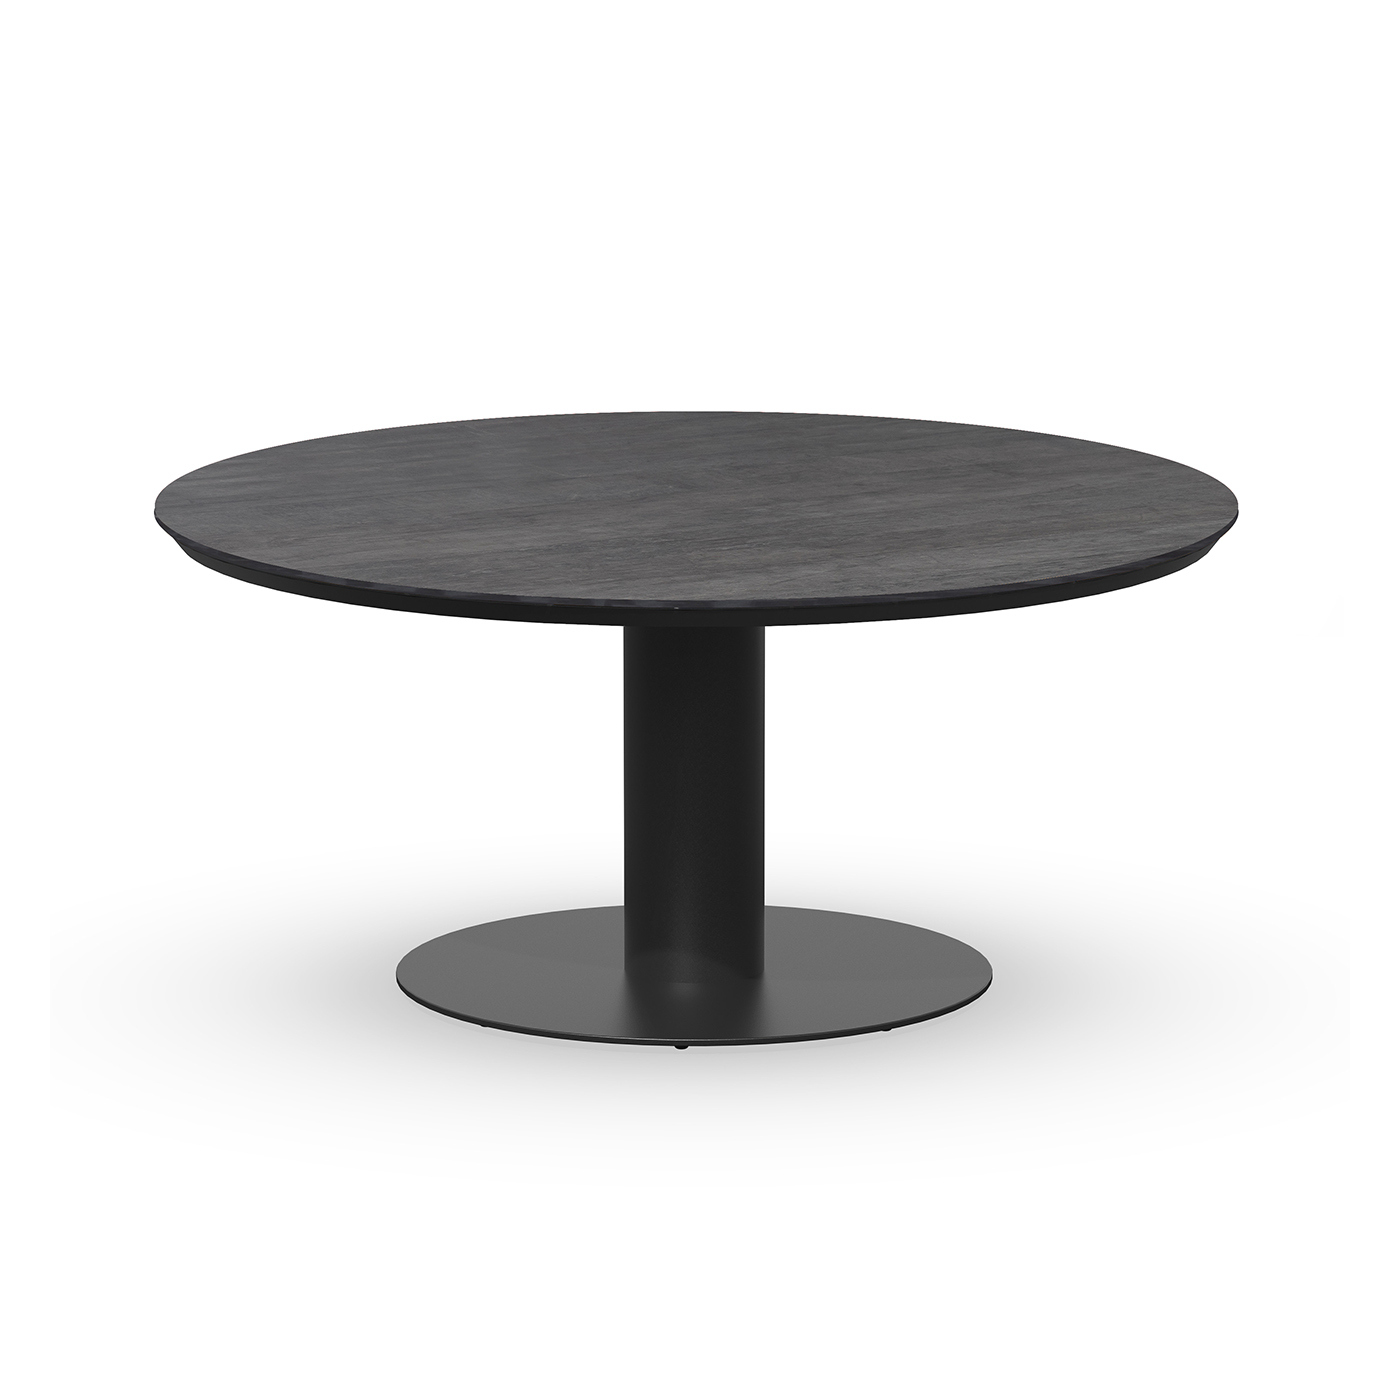 Morena Low Dining Table Trespa Forest Grey 120 cm Ø Charcoal